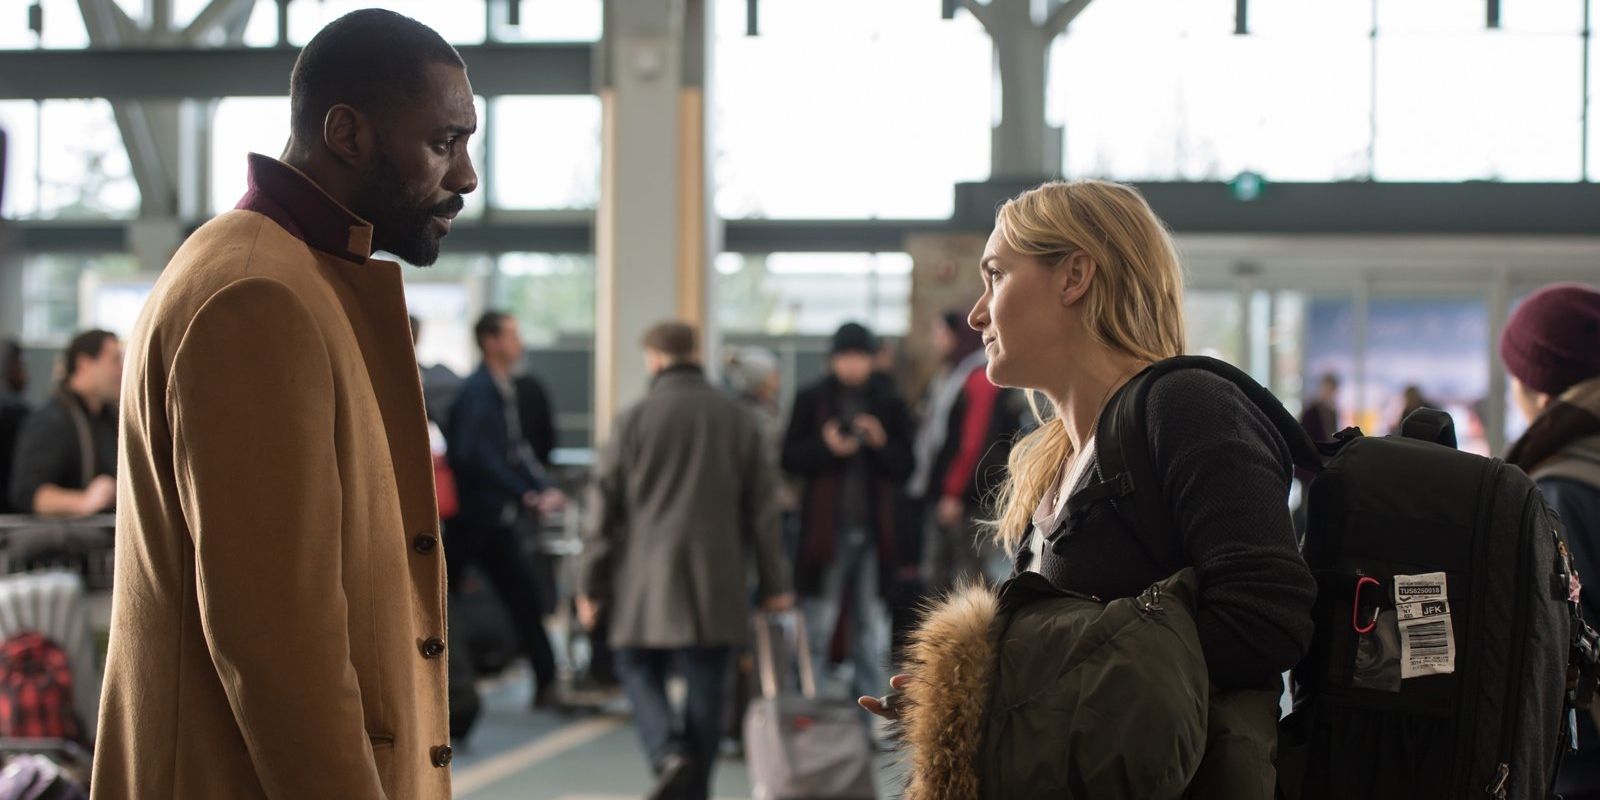 Idris Elba and Kate Winslet in The Mountain Between Us